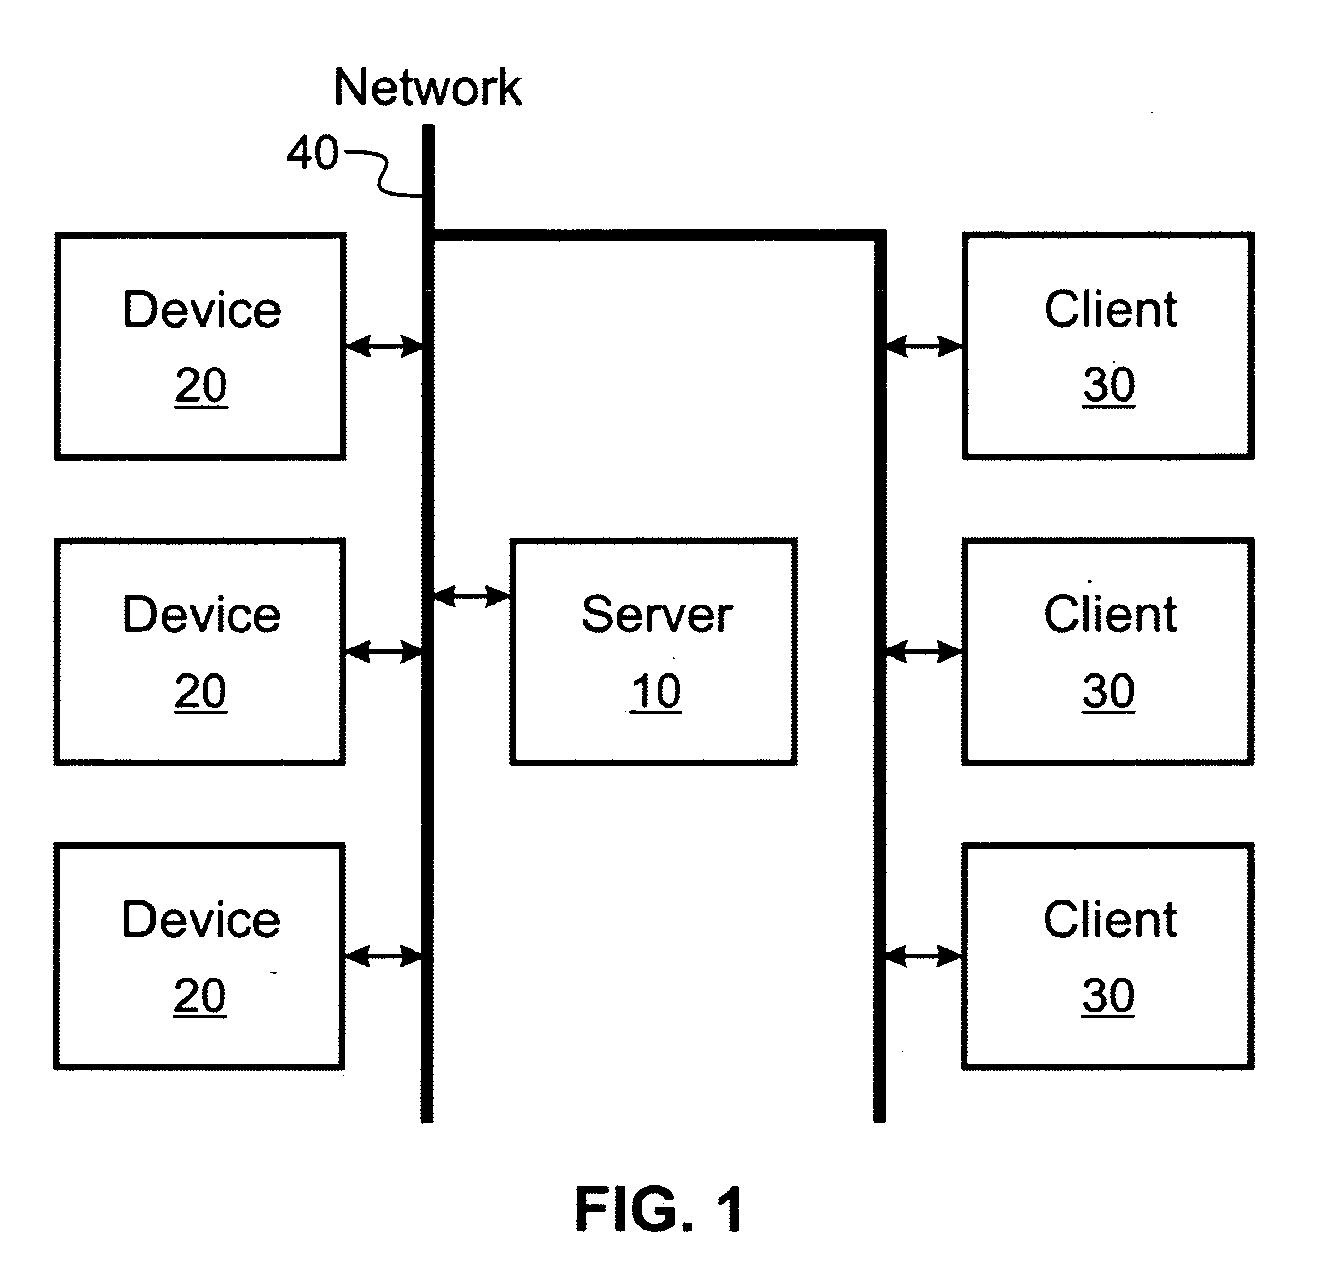 System for Remote Configuration, Control, and Monitoring of Devices Over Computer Network Using Central Server